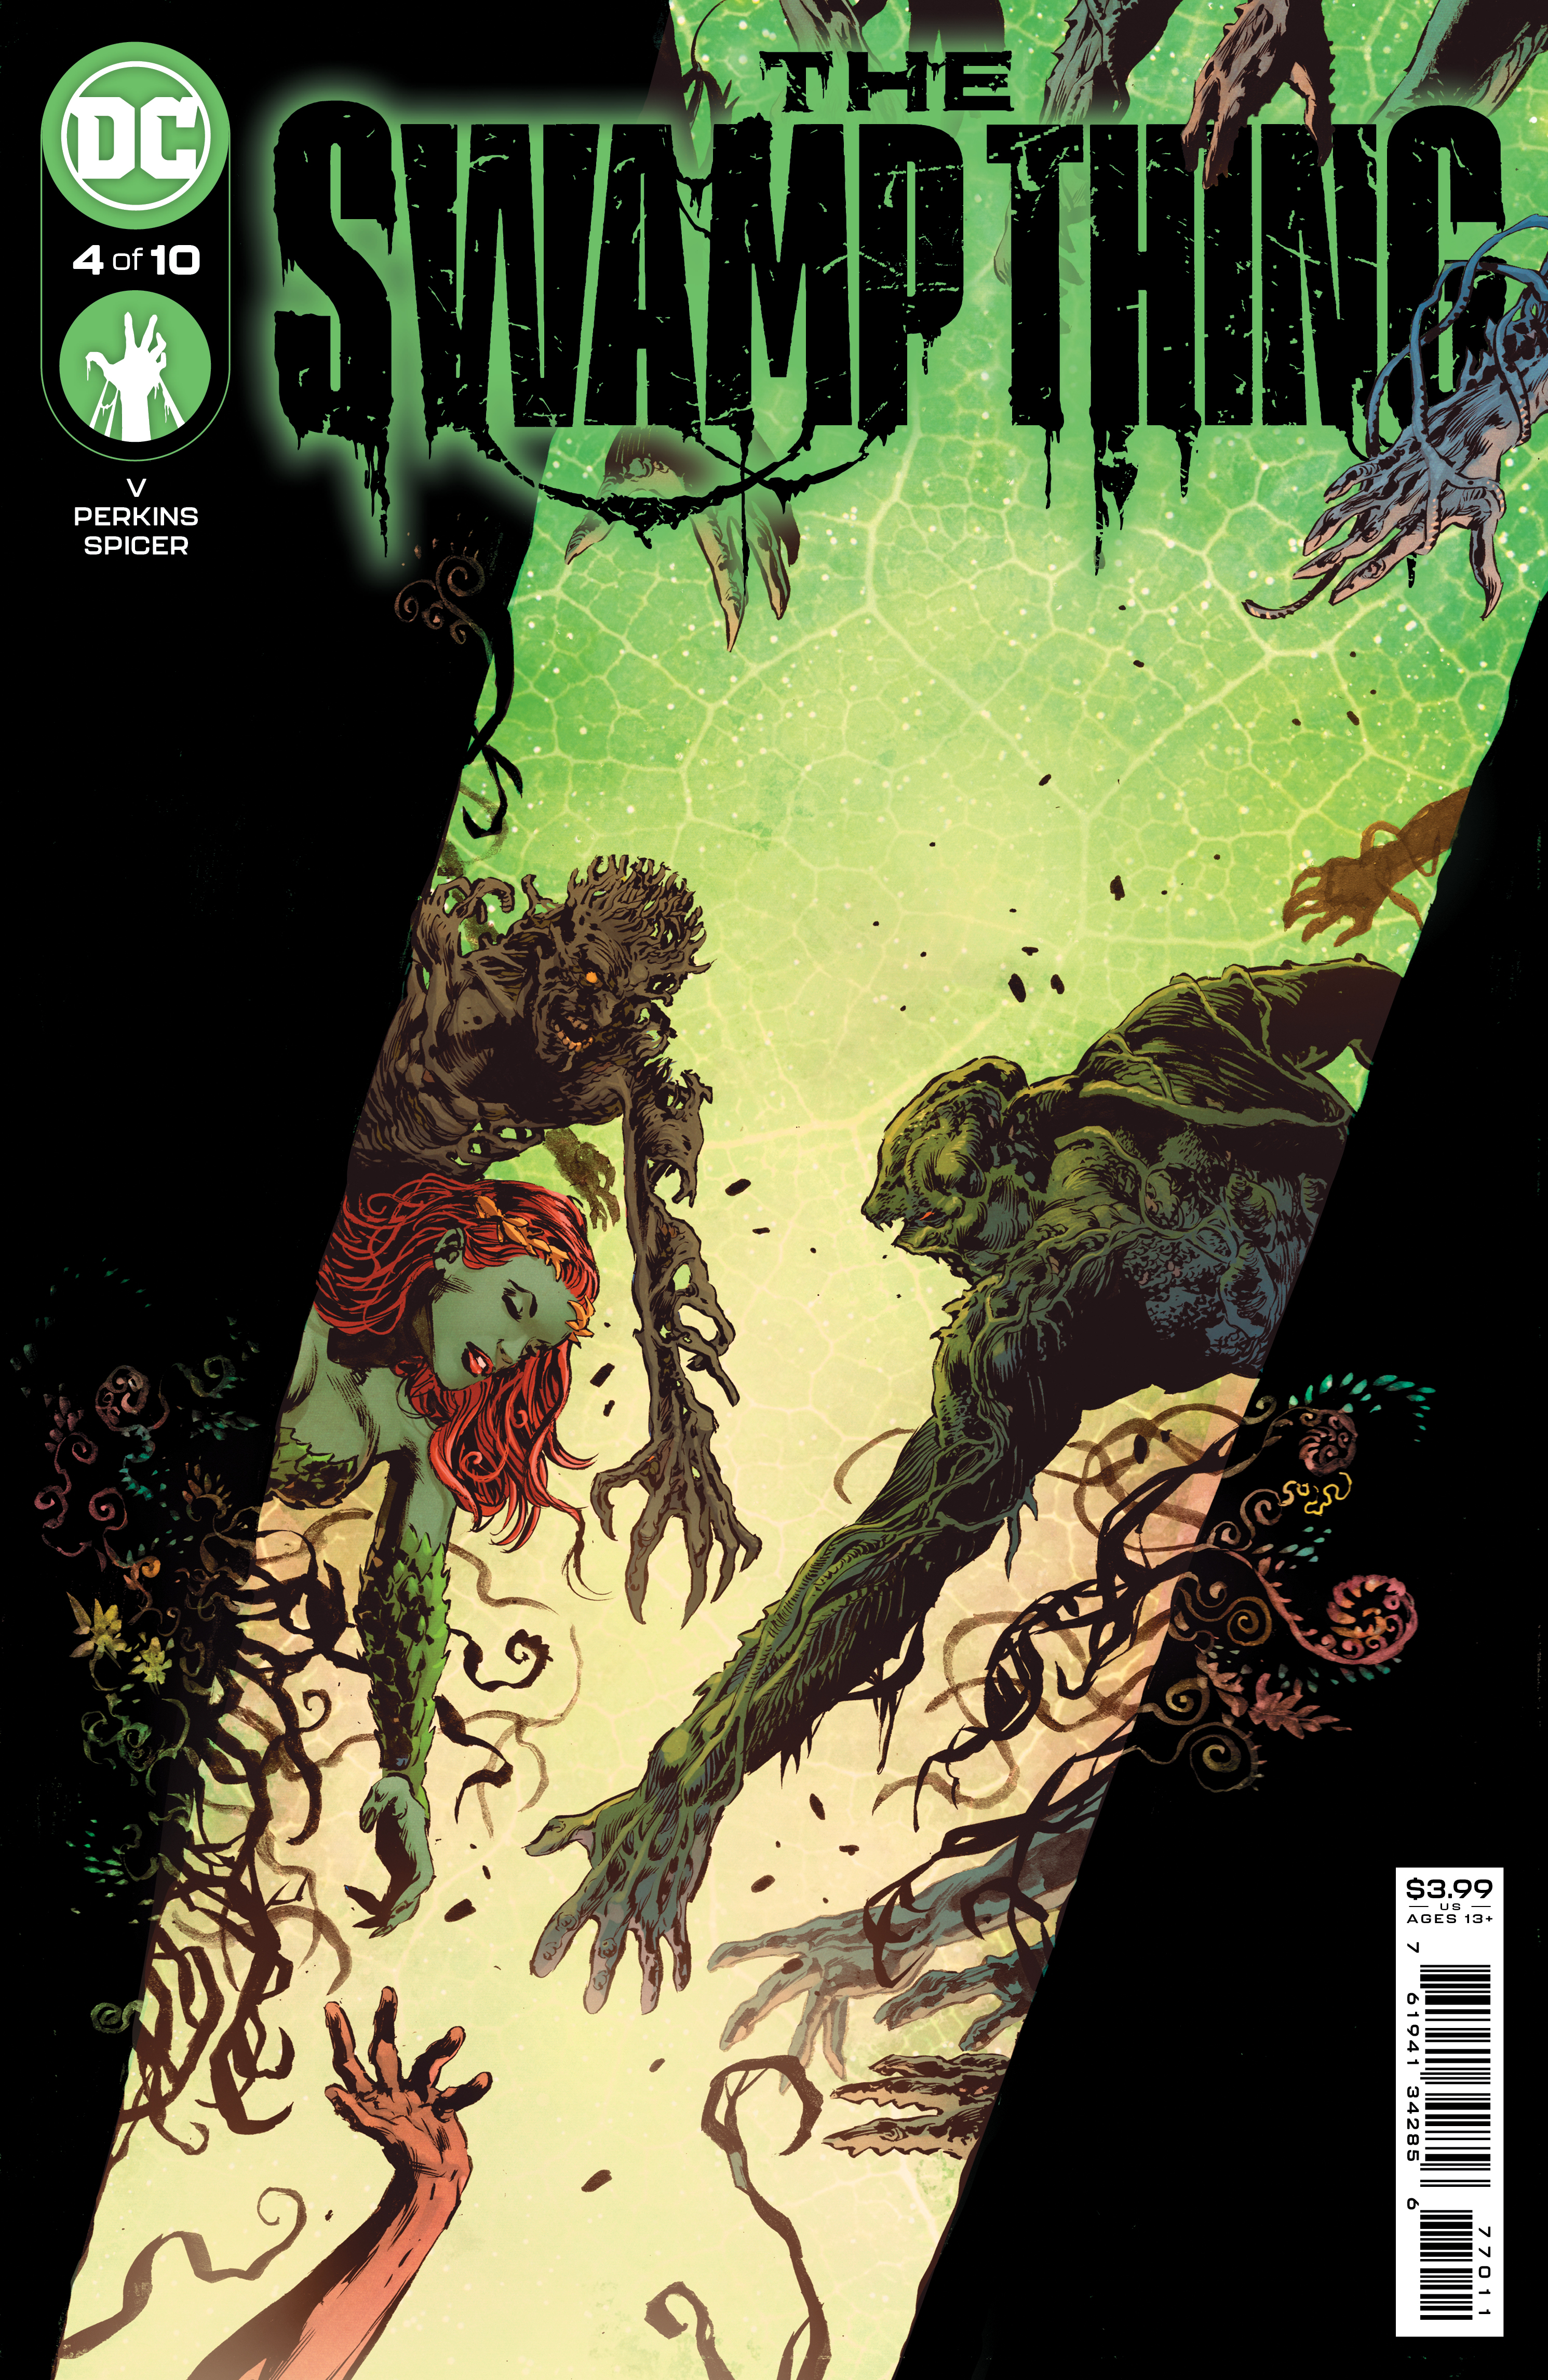 Swamp Thing #4 (Of 10) Cover A Mike Perkins & Mike Spicer (2021)